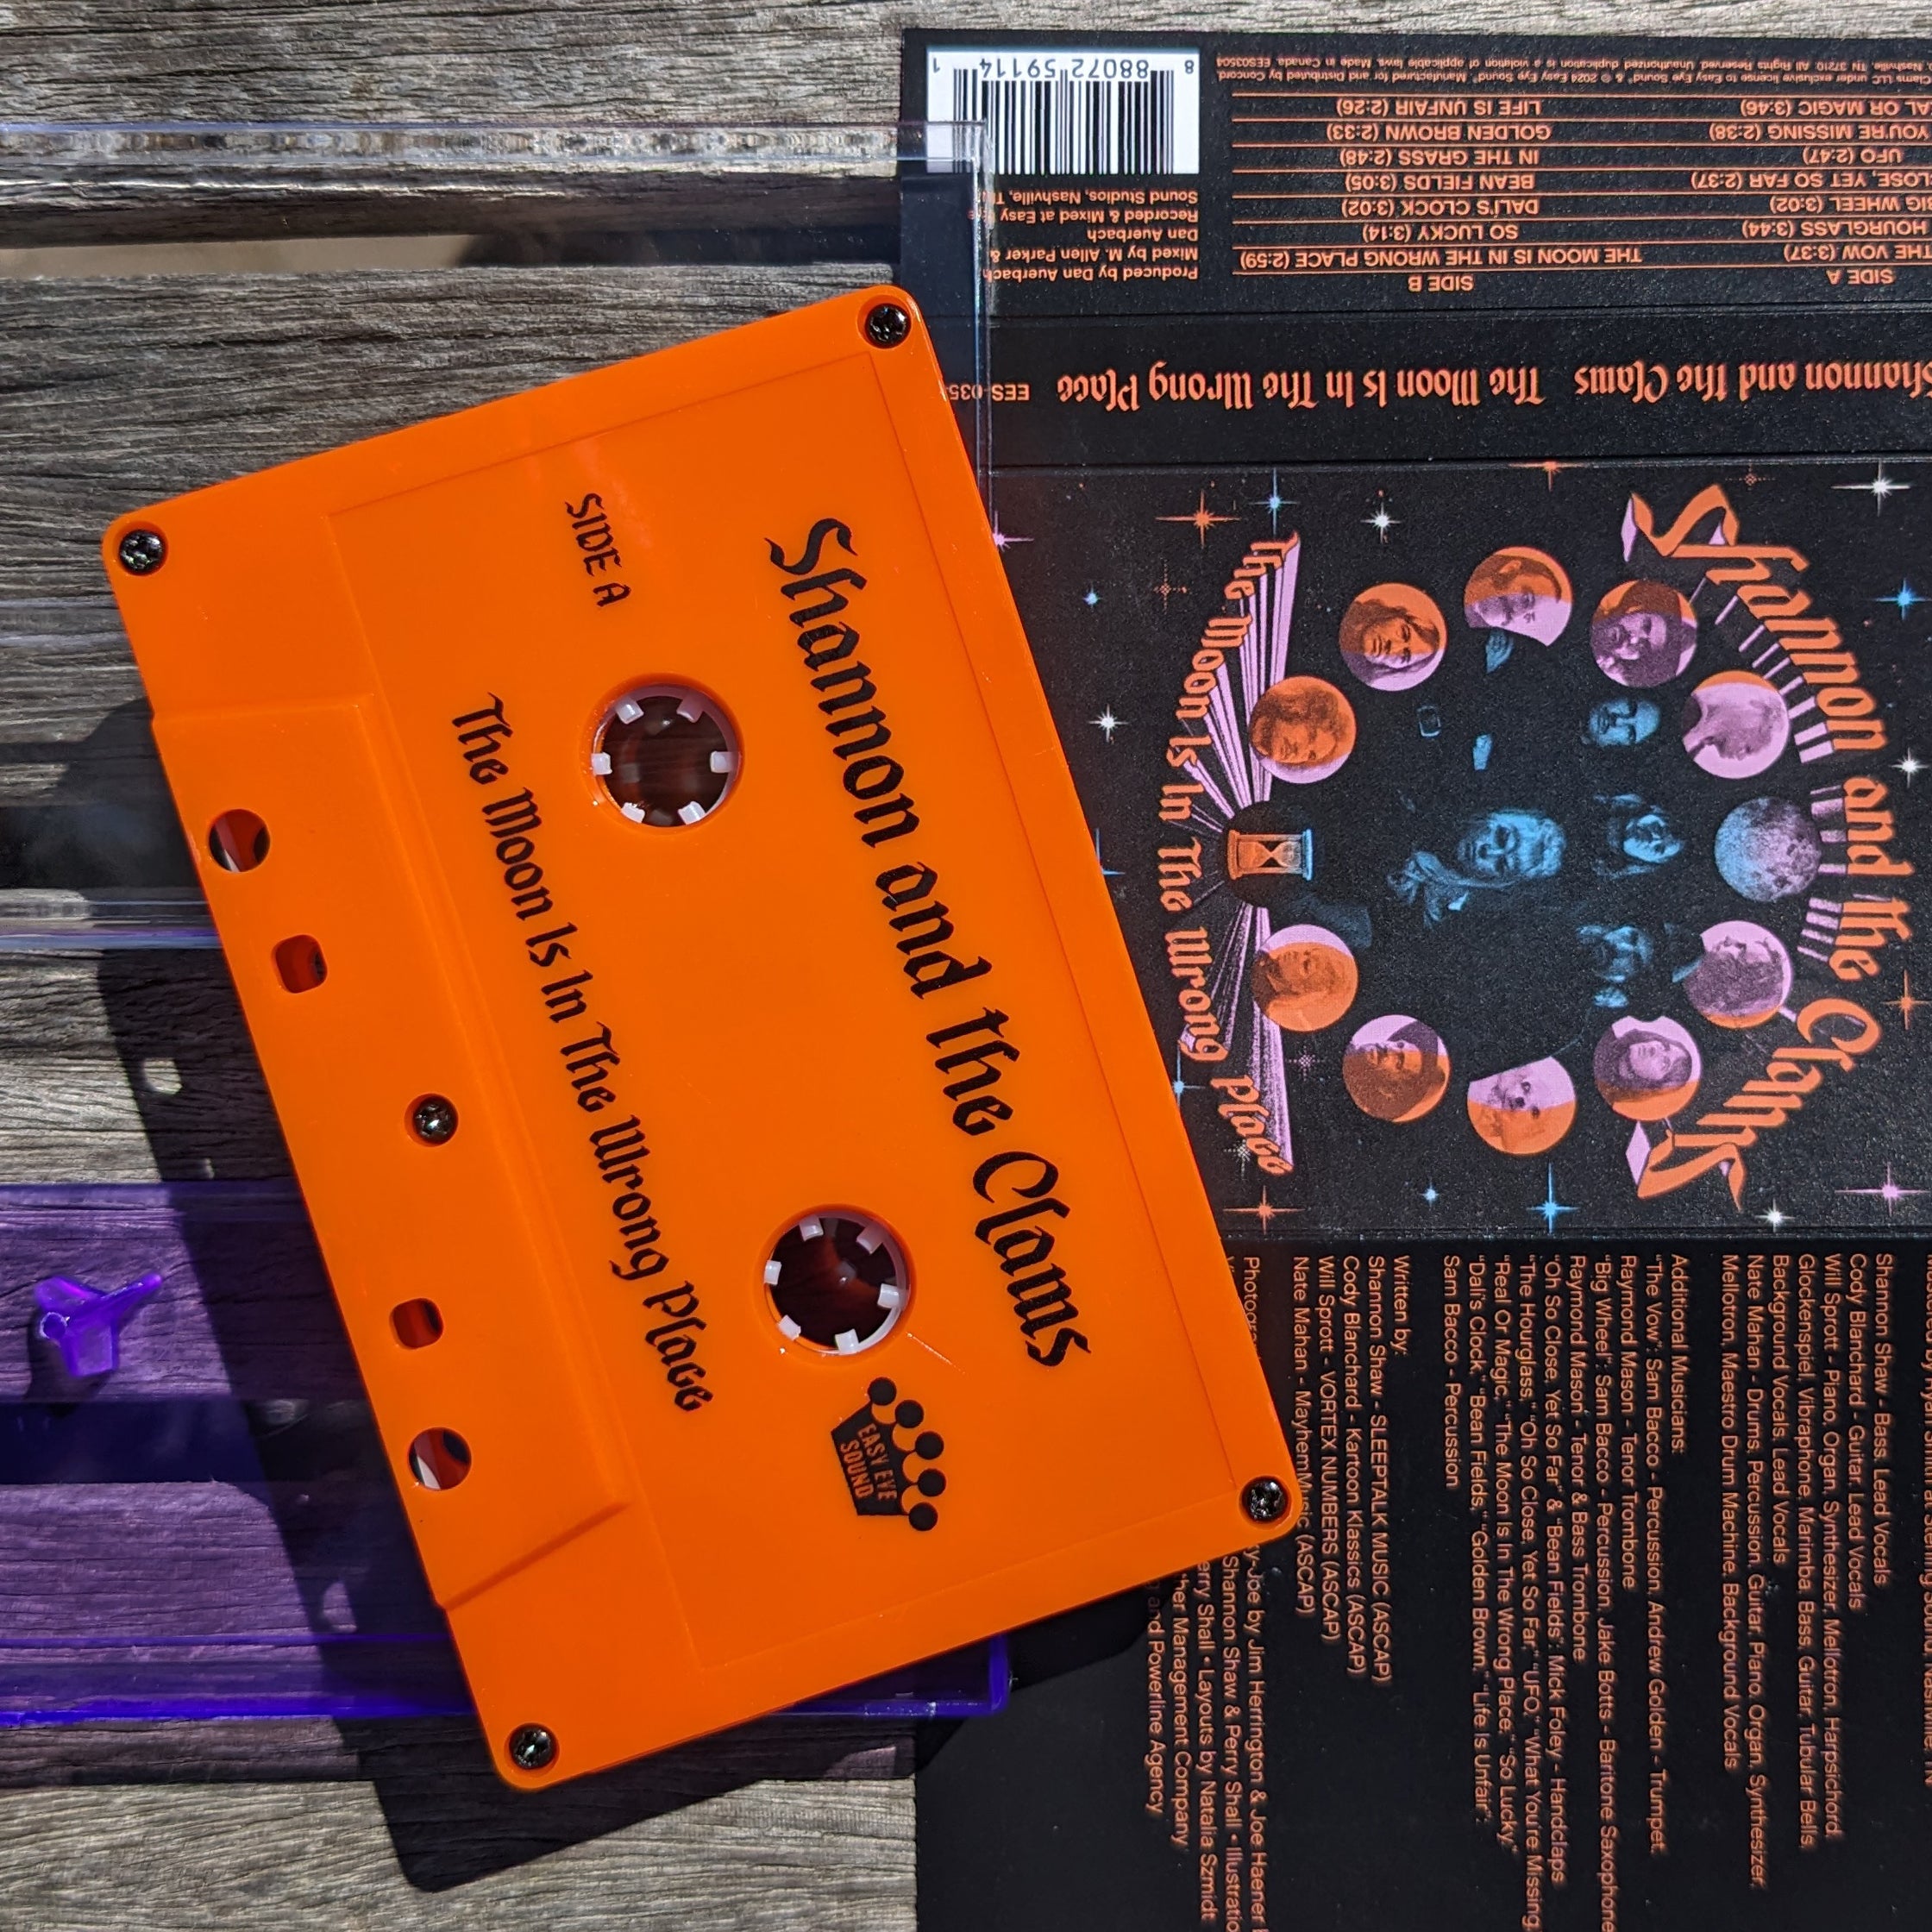 The Moon Is In The Wrong Place [Cassette]